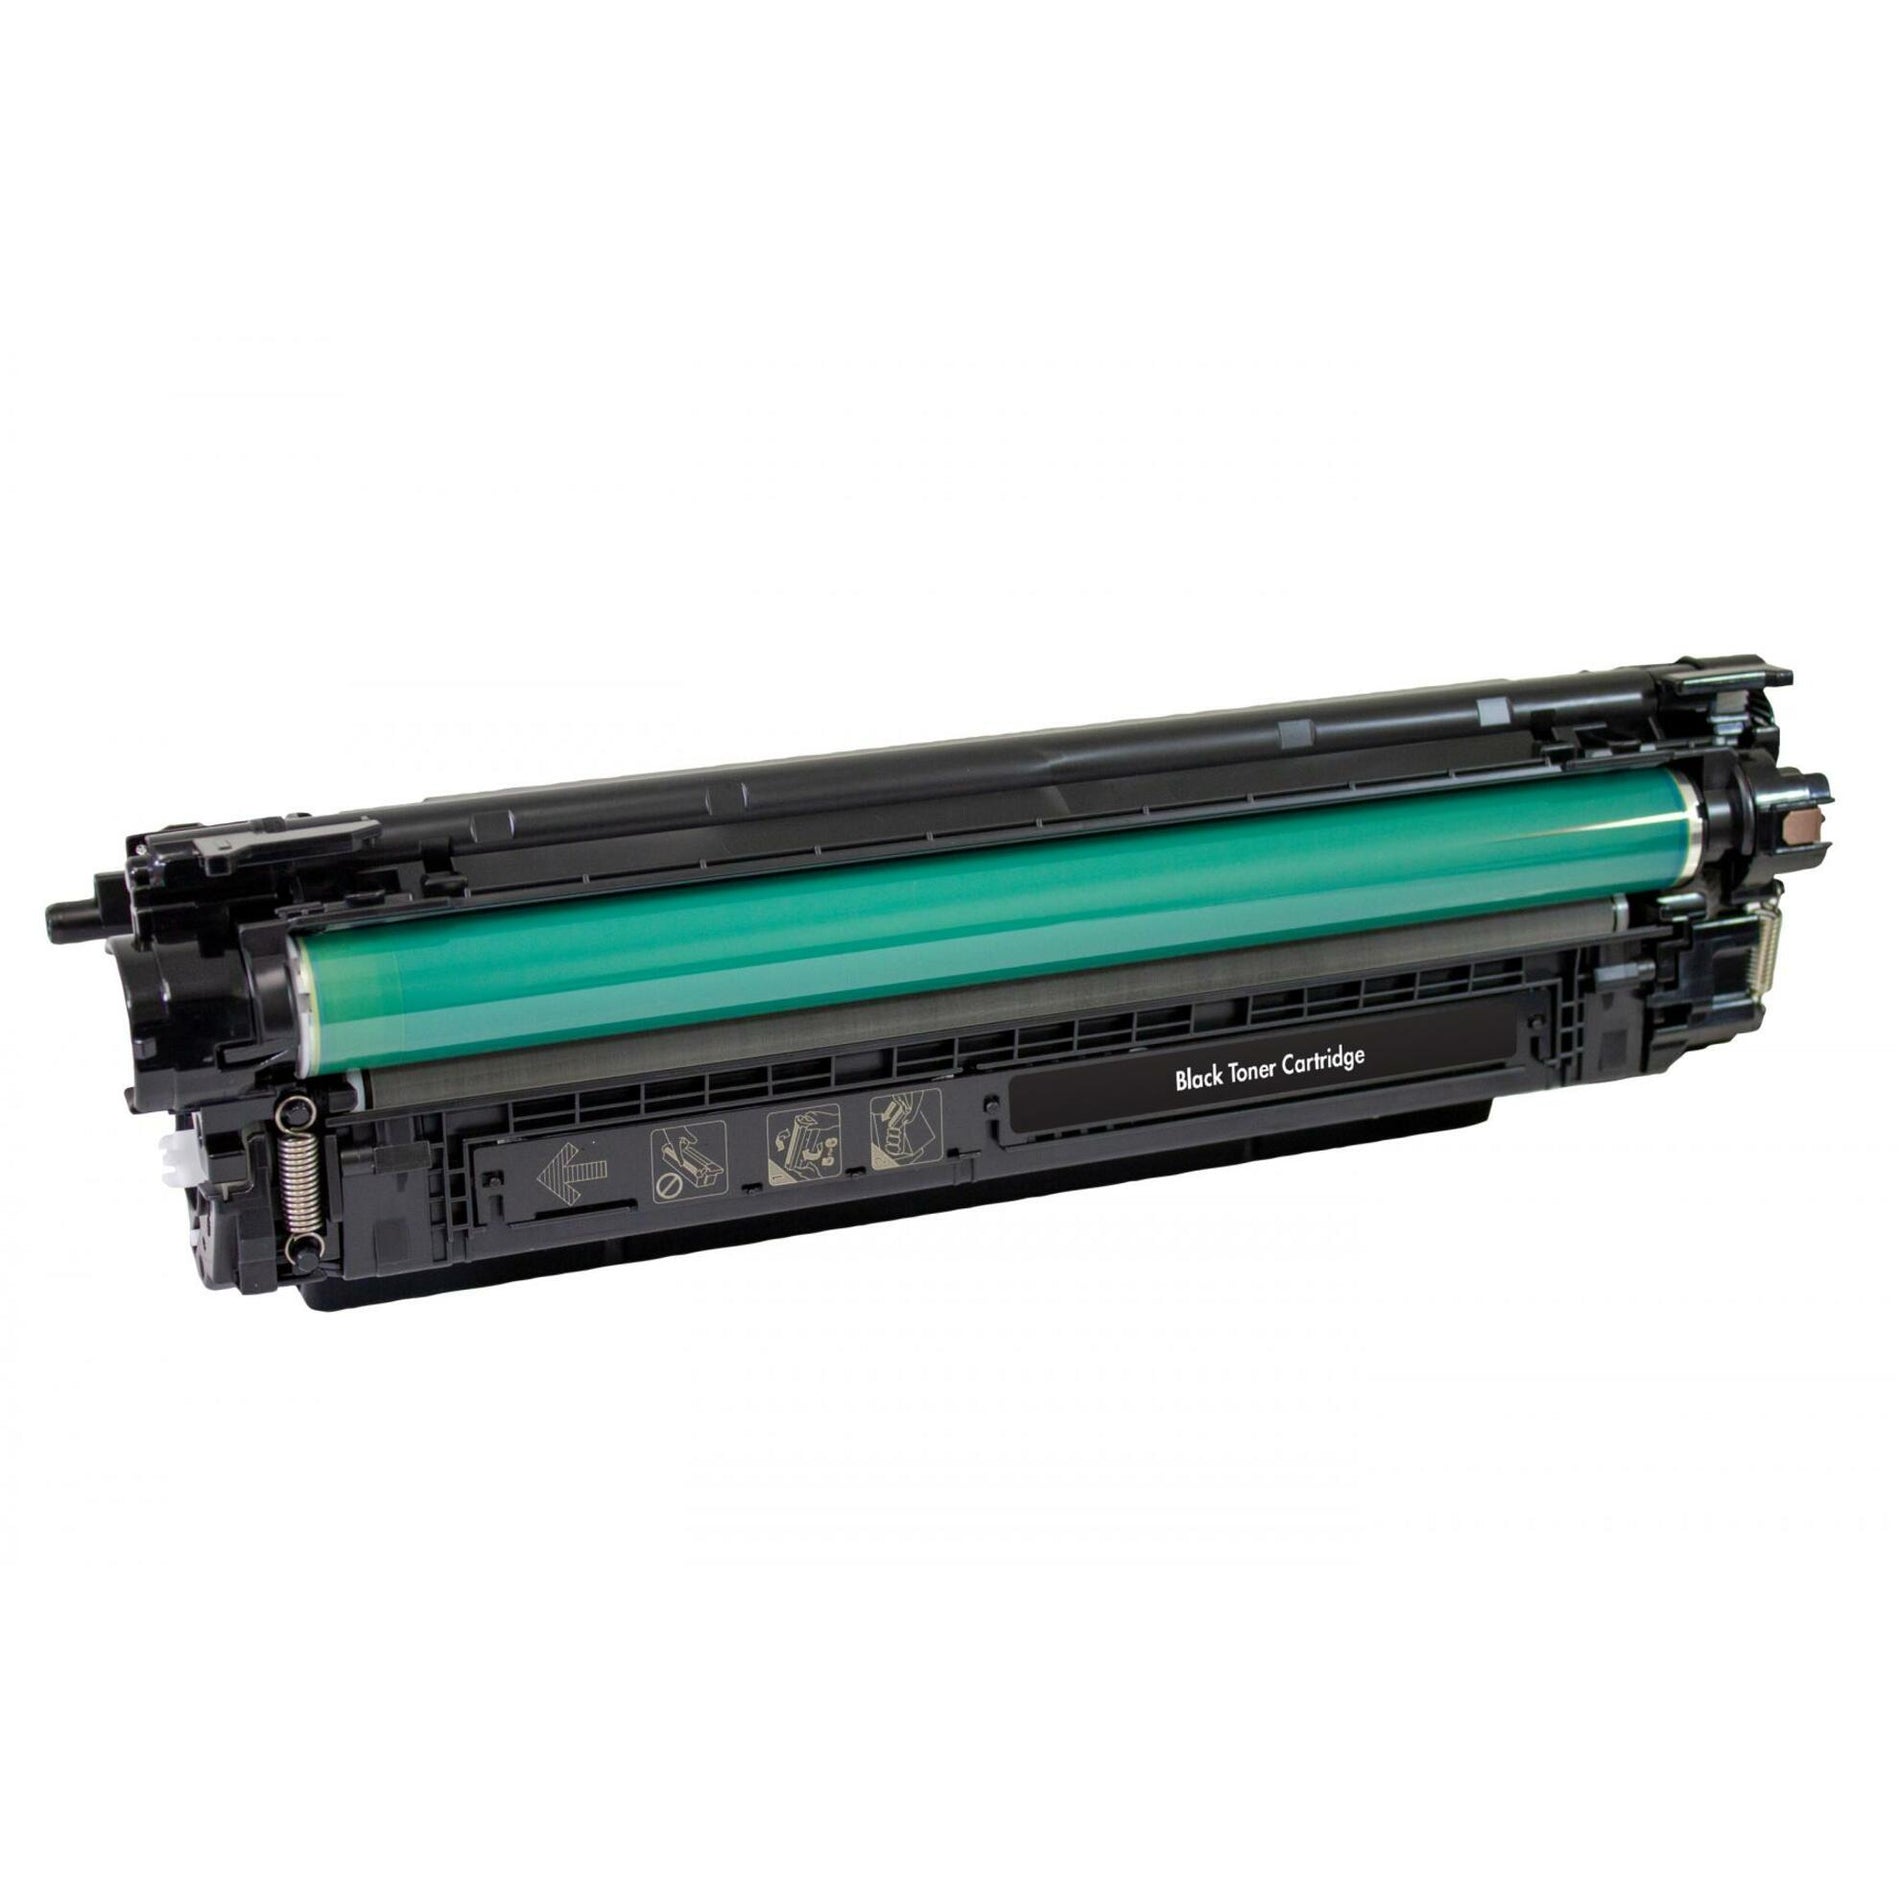 Clover Technologies 200941P Toner Cartridge, High Yield, Black, 12500 Pages